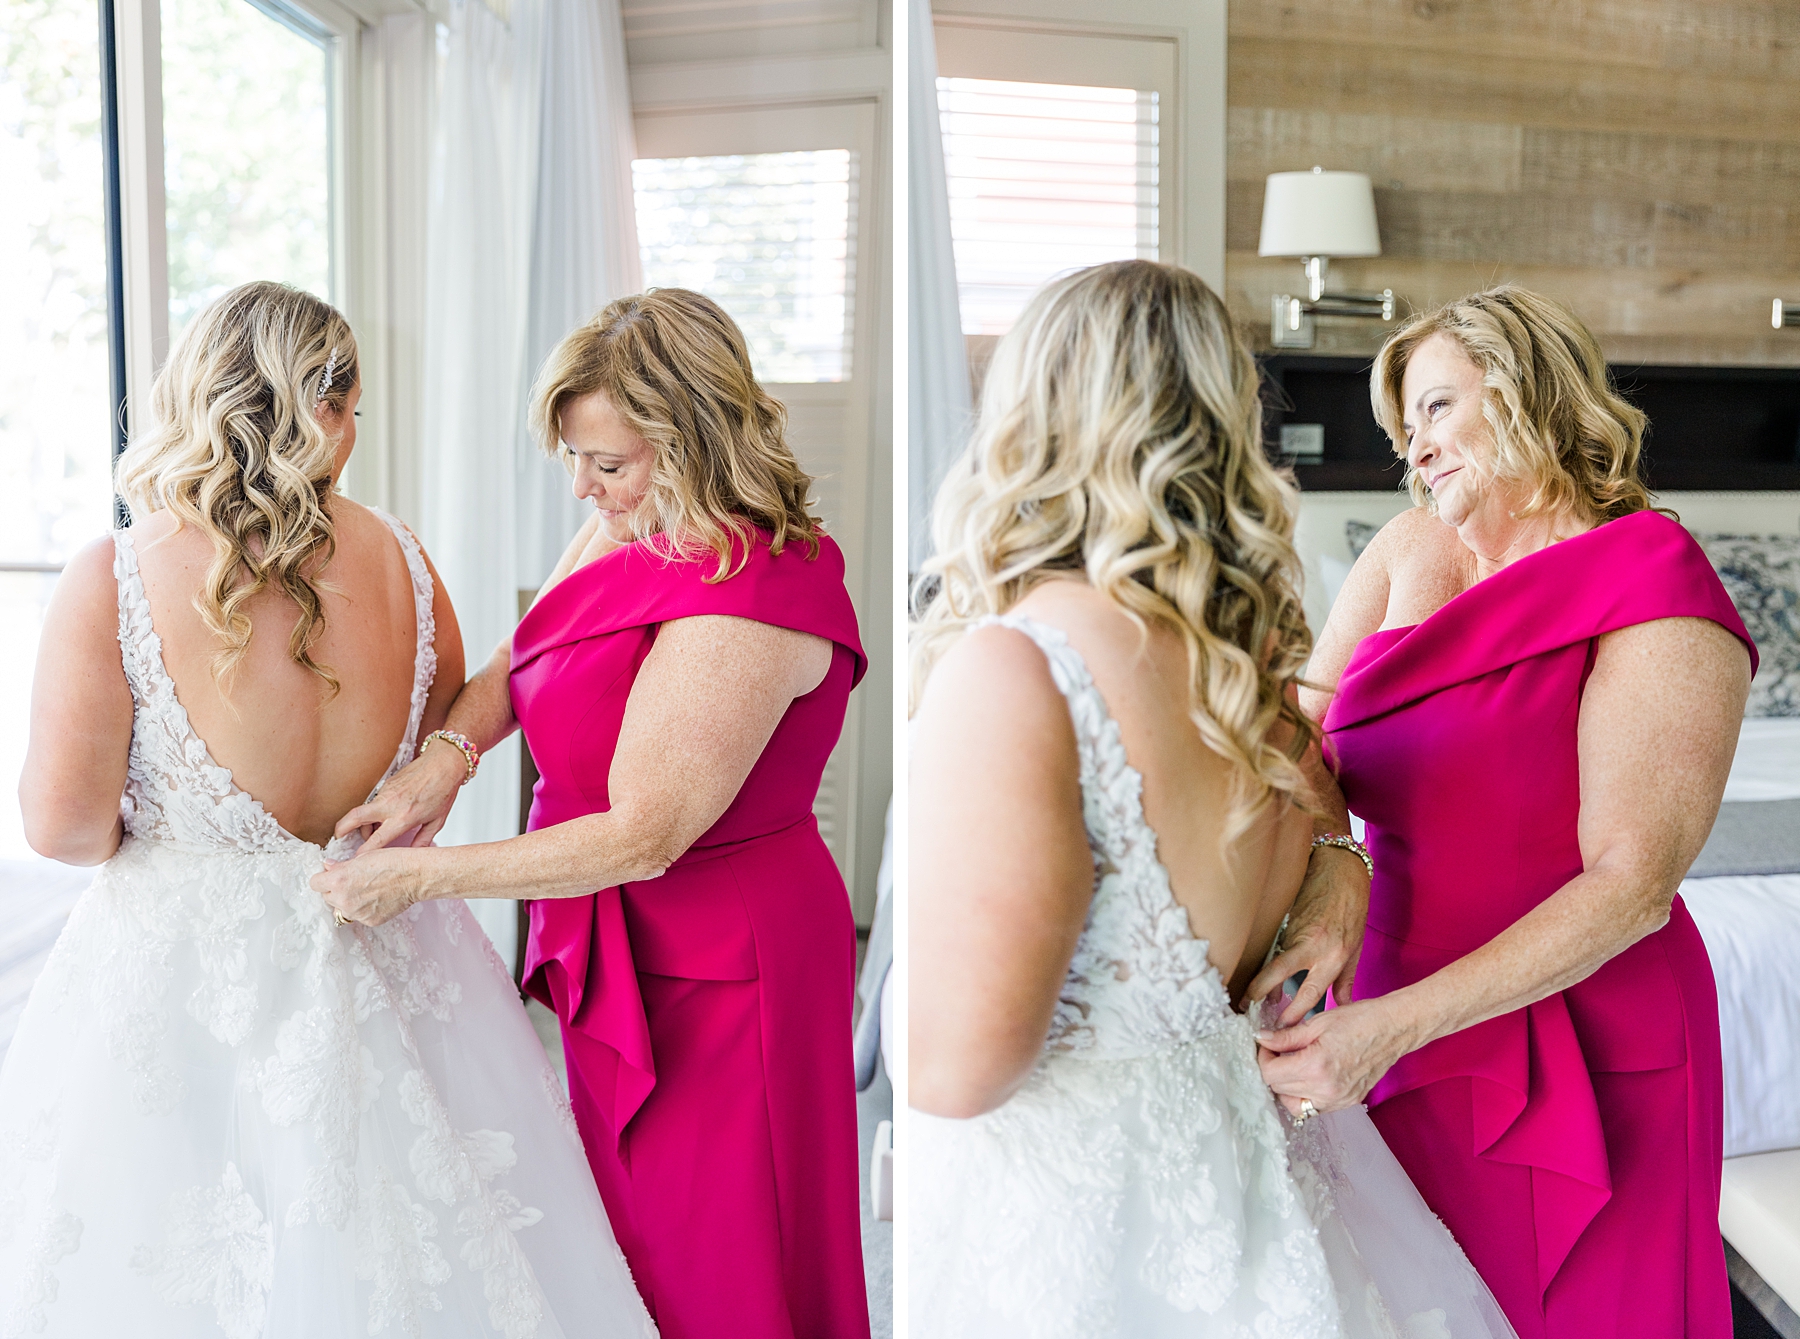 Mother of the bride helps daughter in dress